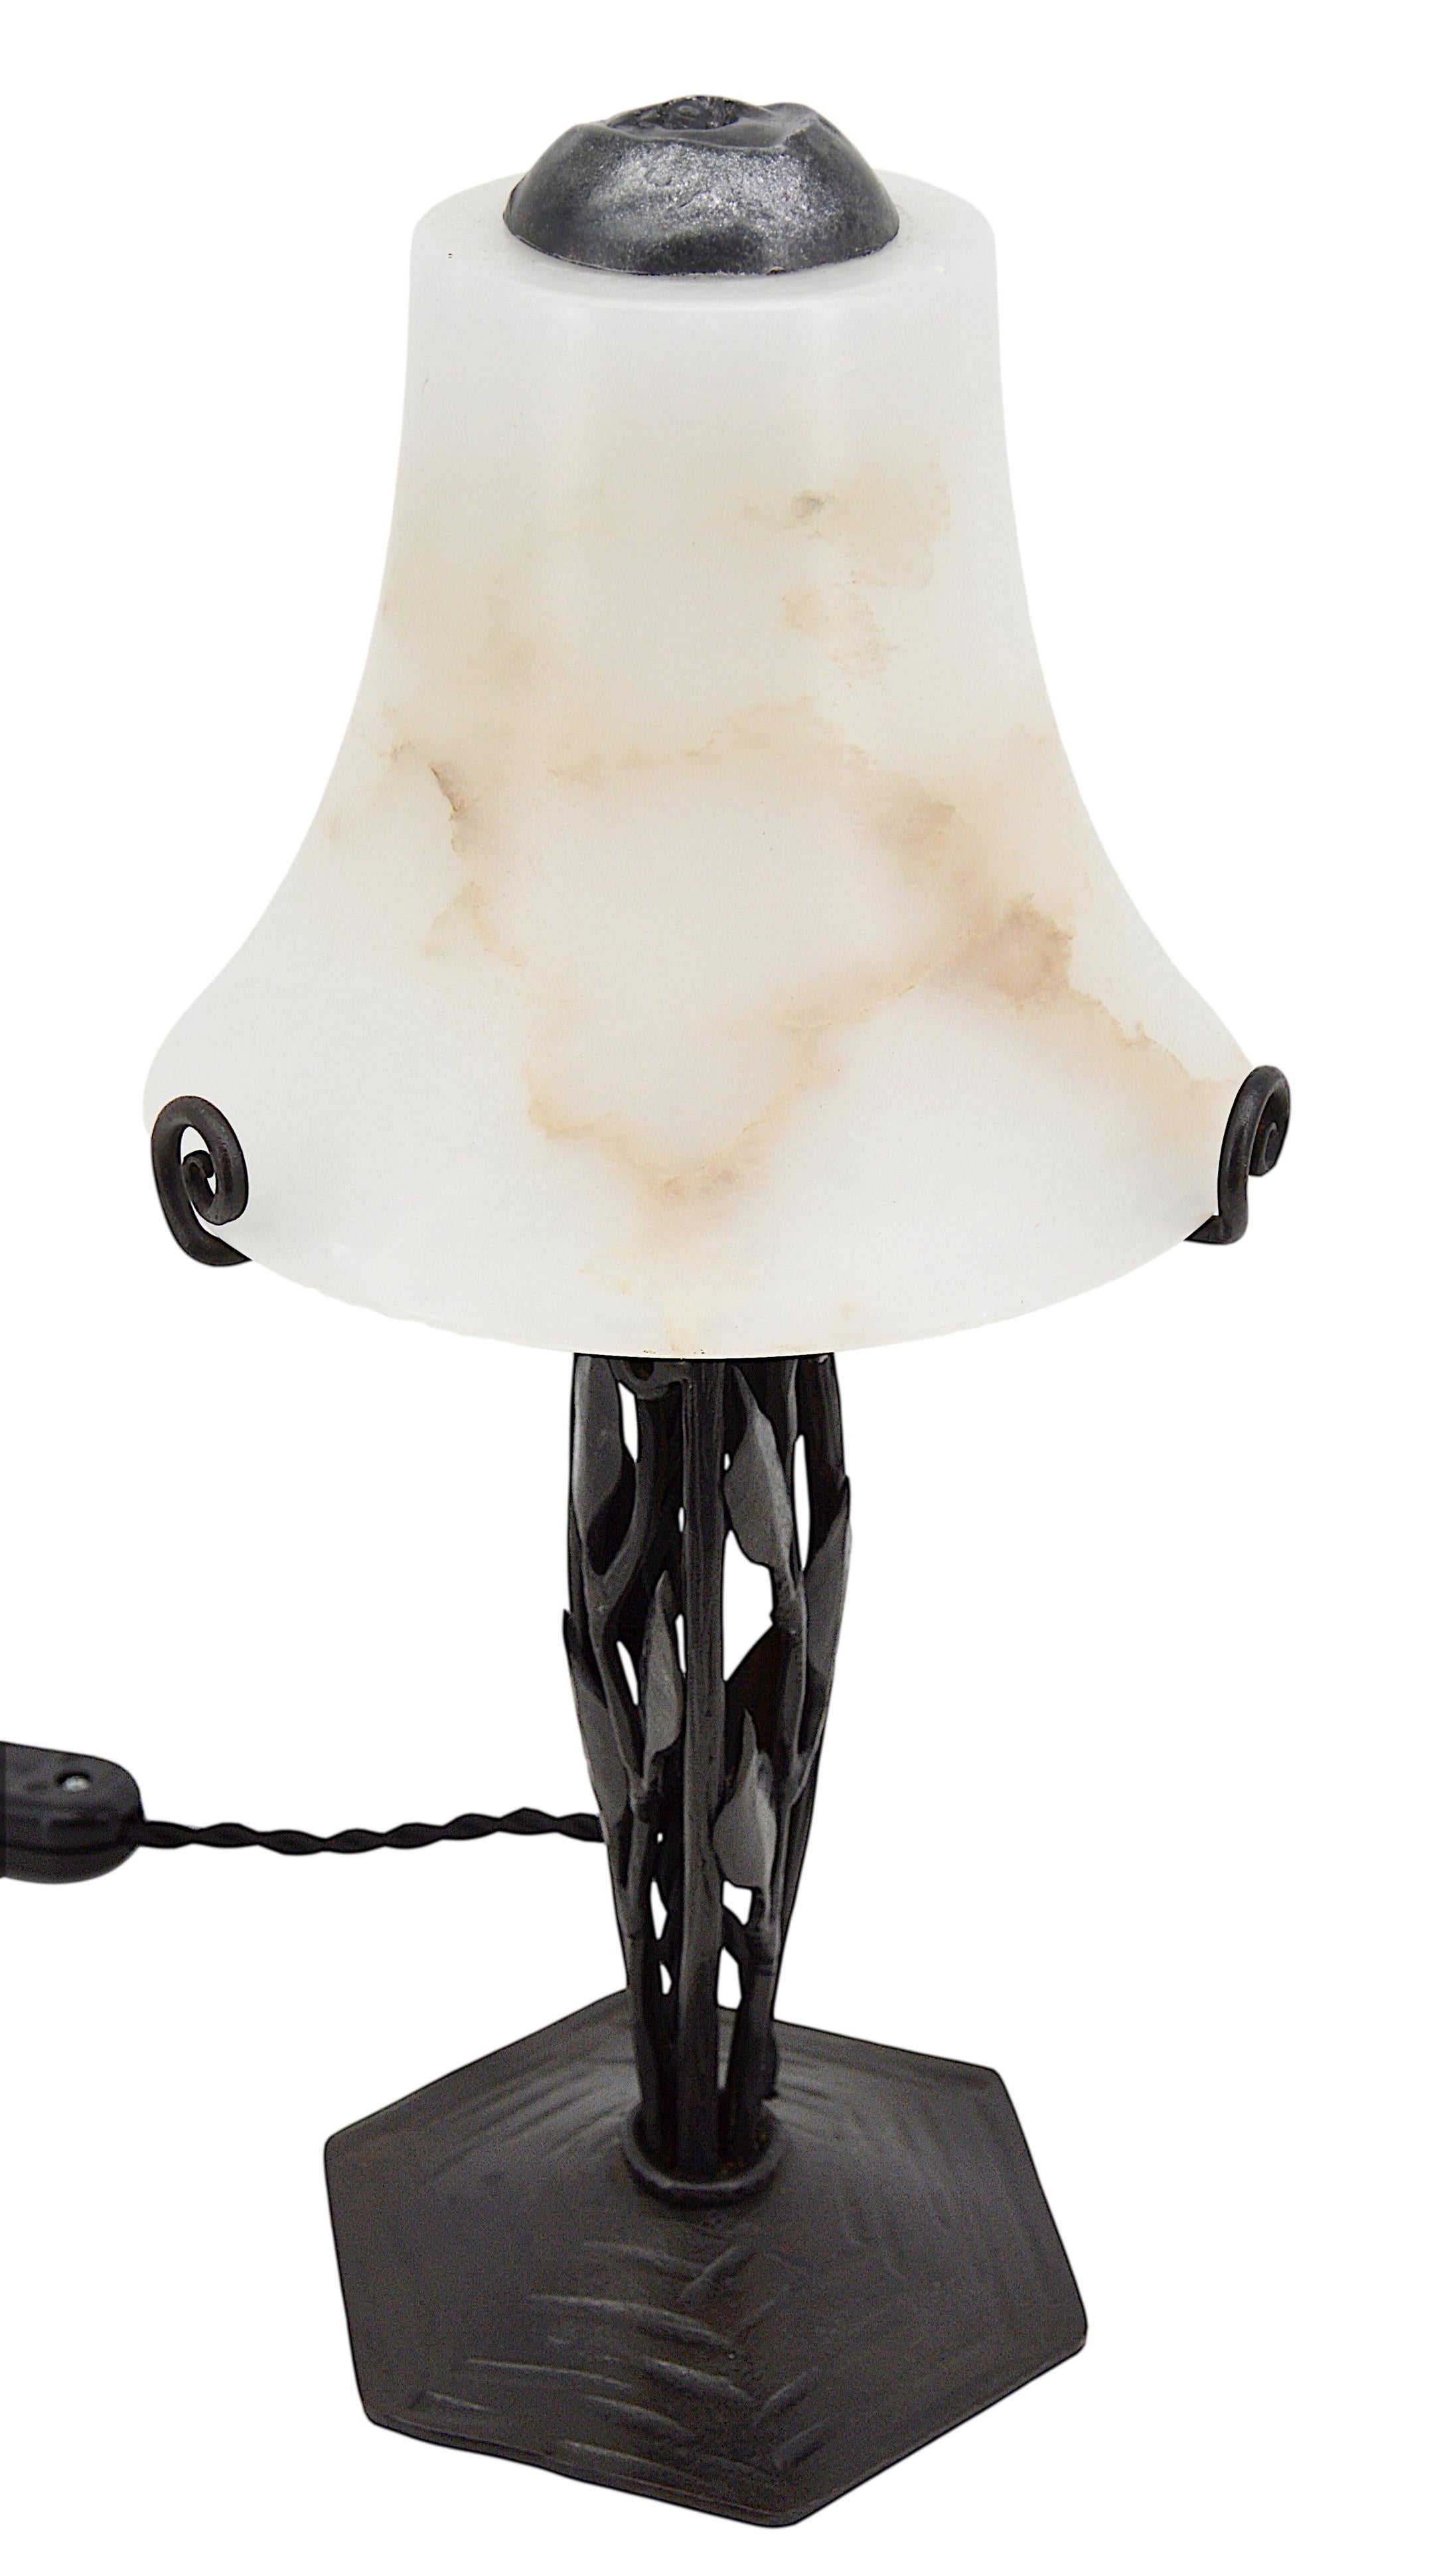 French Art Deco Alabaster and Wrought-Iron Table Lamp, 1925 In Excellent Condition For Sale In Saint-Amans-des-Cots, FR